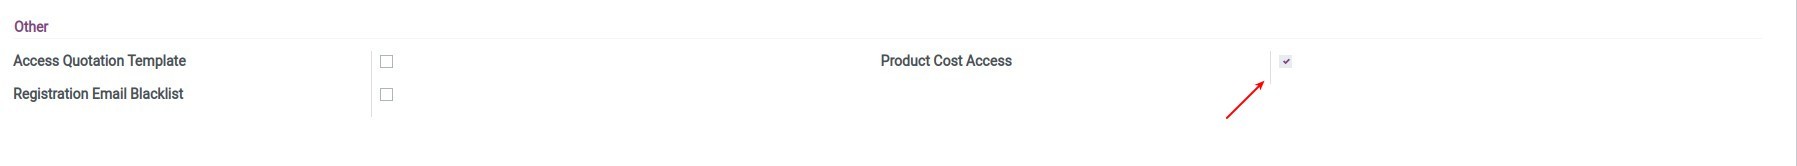 Product Cost Access